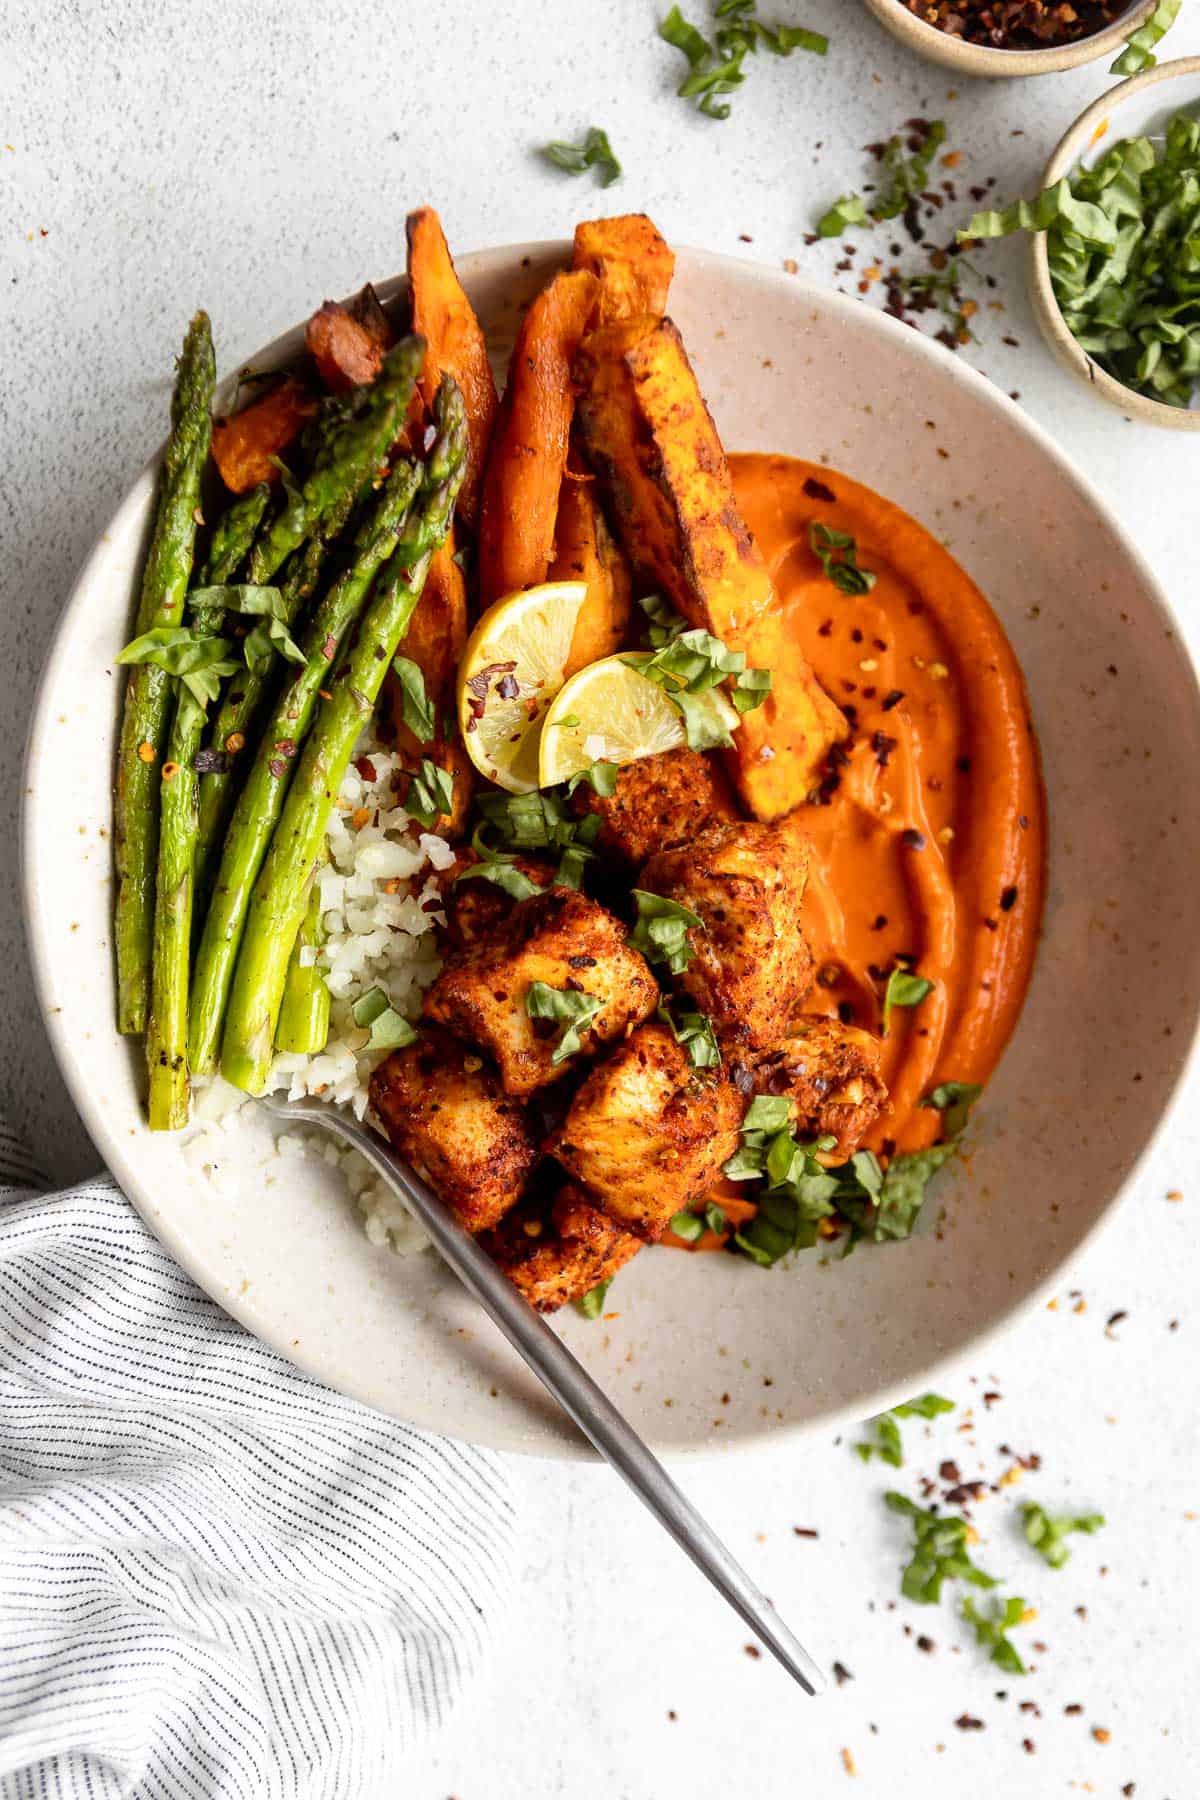 lemon pepper chicken bowls with sweet potatoes and asparagus